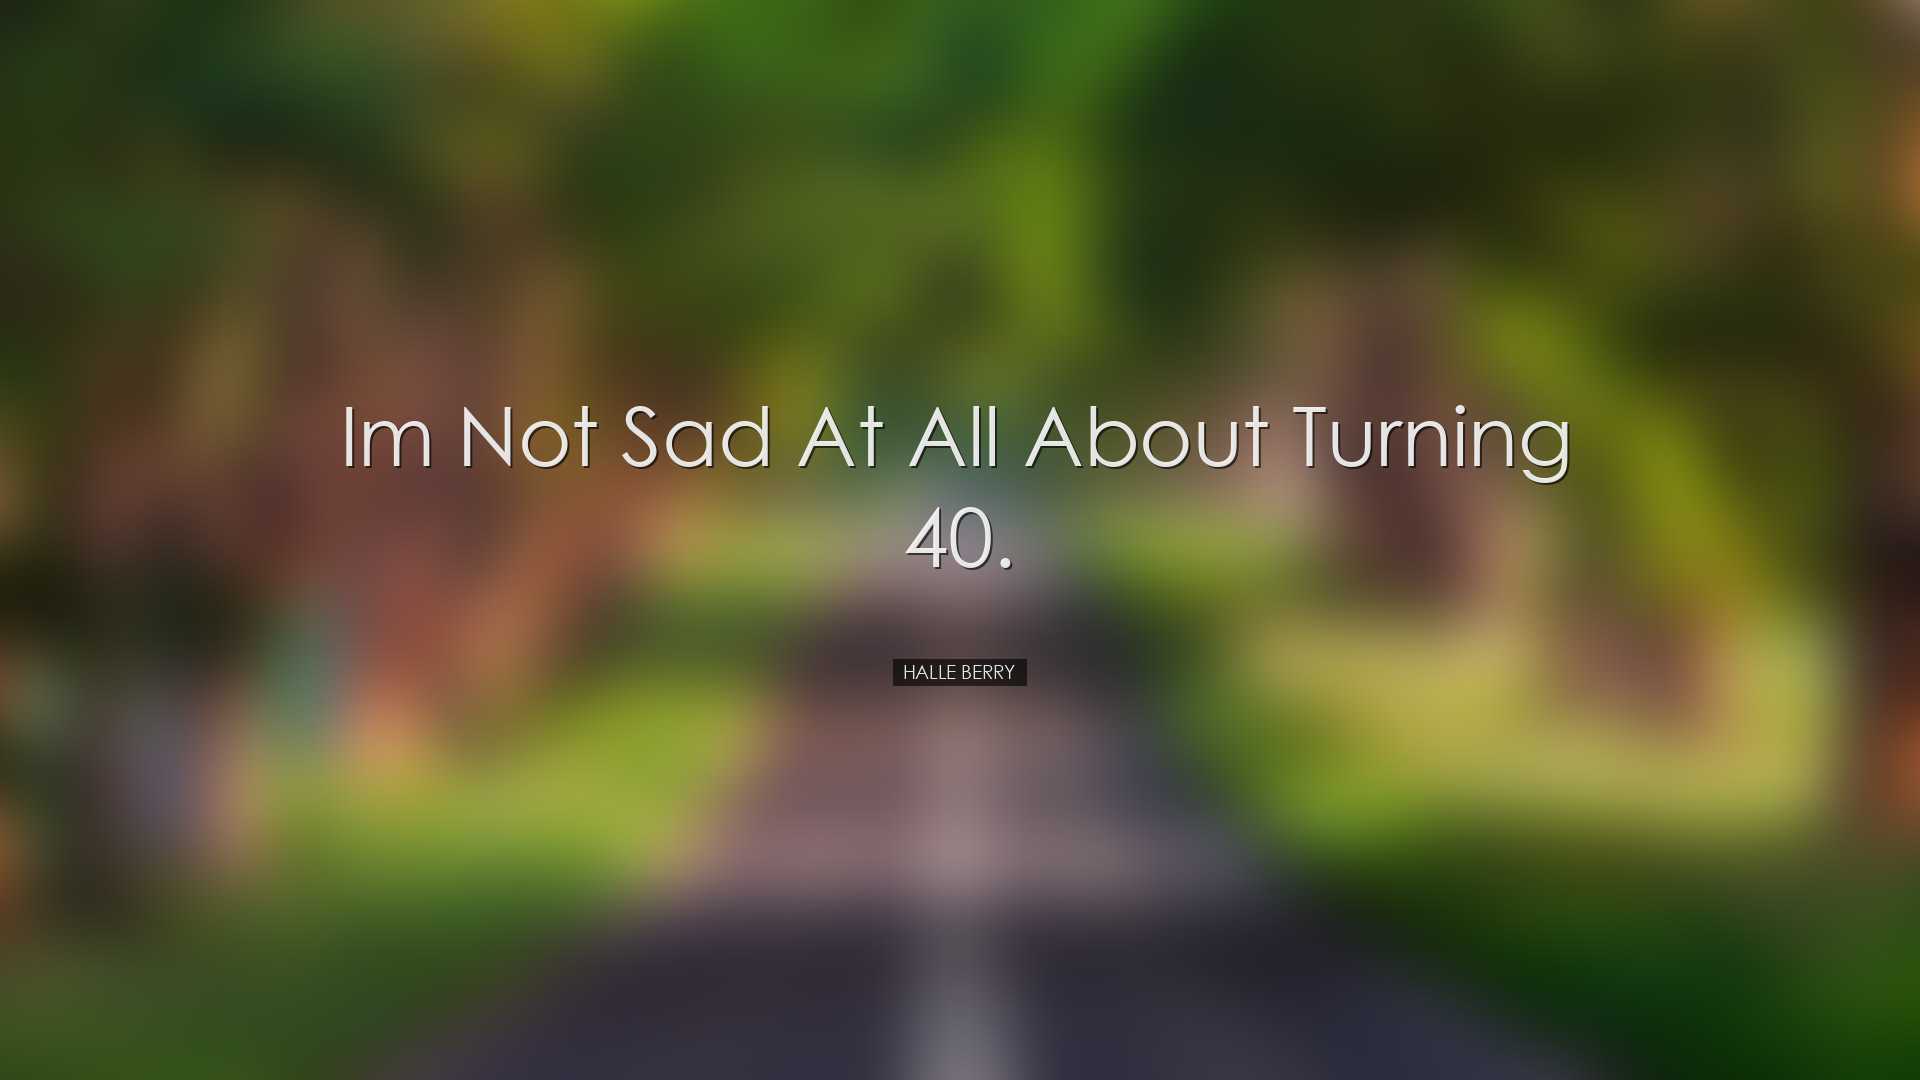 Im not sad at all about turning 40. - Halle Berry